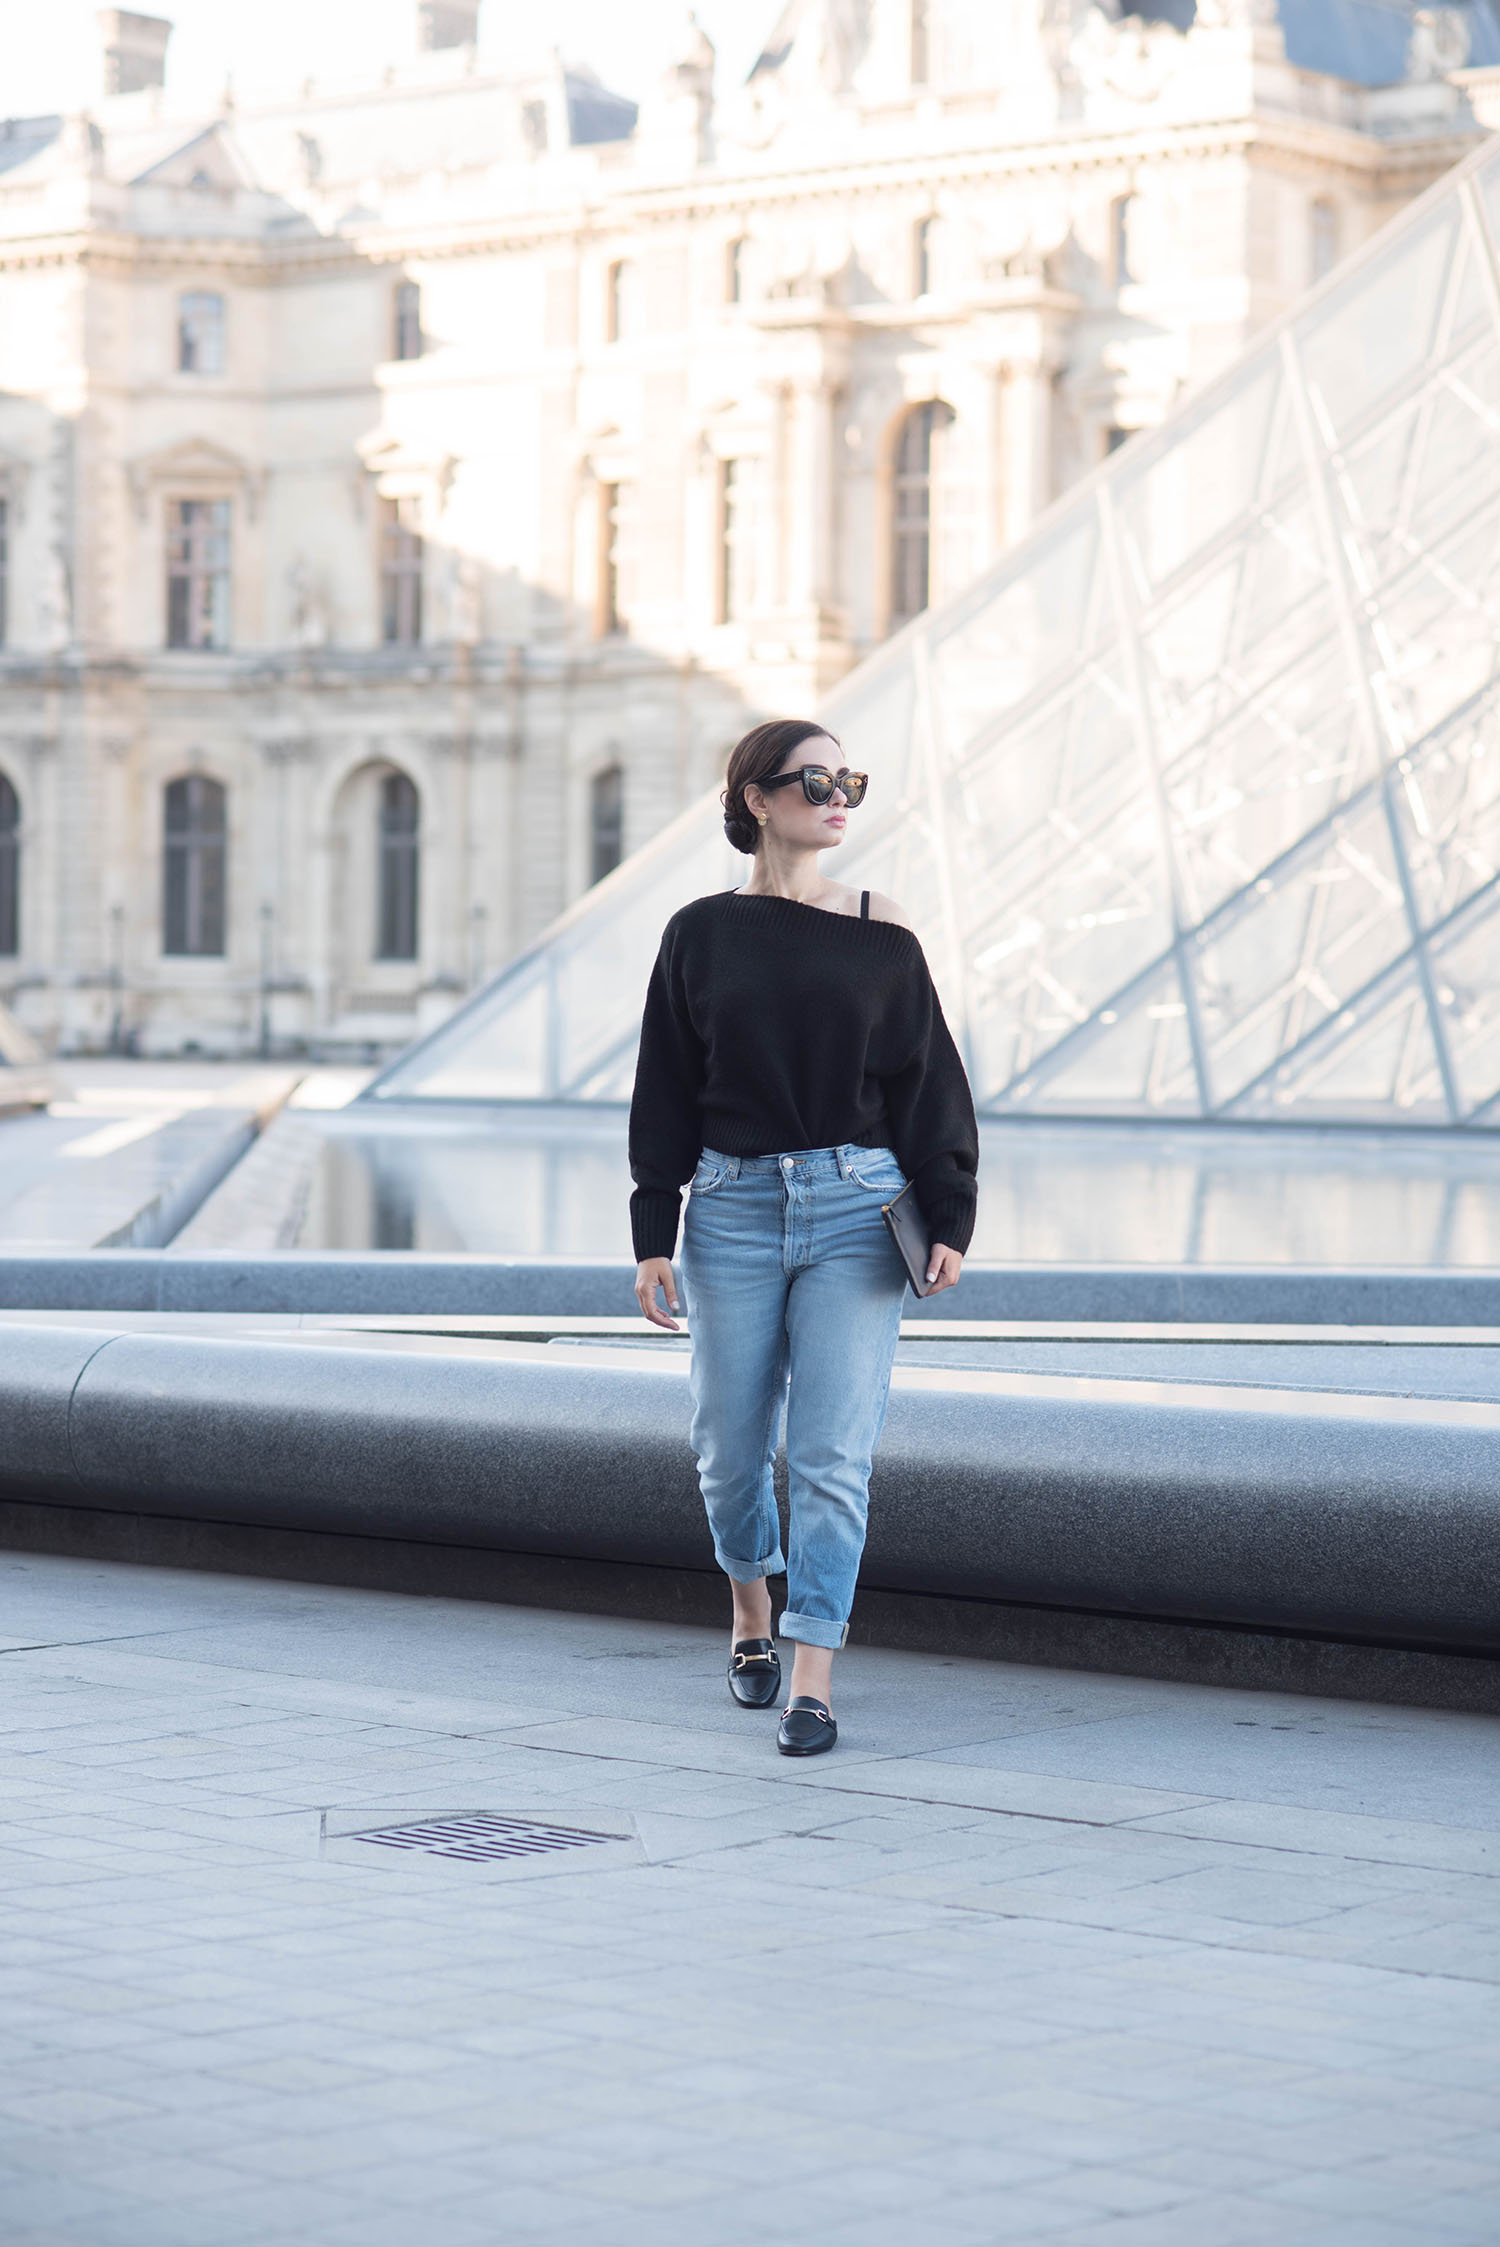 Fashion blogger Cee Fardoe of Coco & Vera walks in front of the Louvre pyramid wearing Zara boyfriend jeans and carrying a Celine clutch